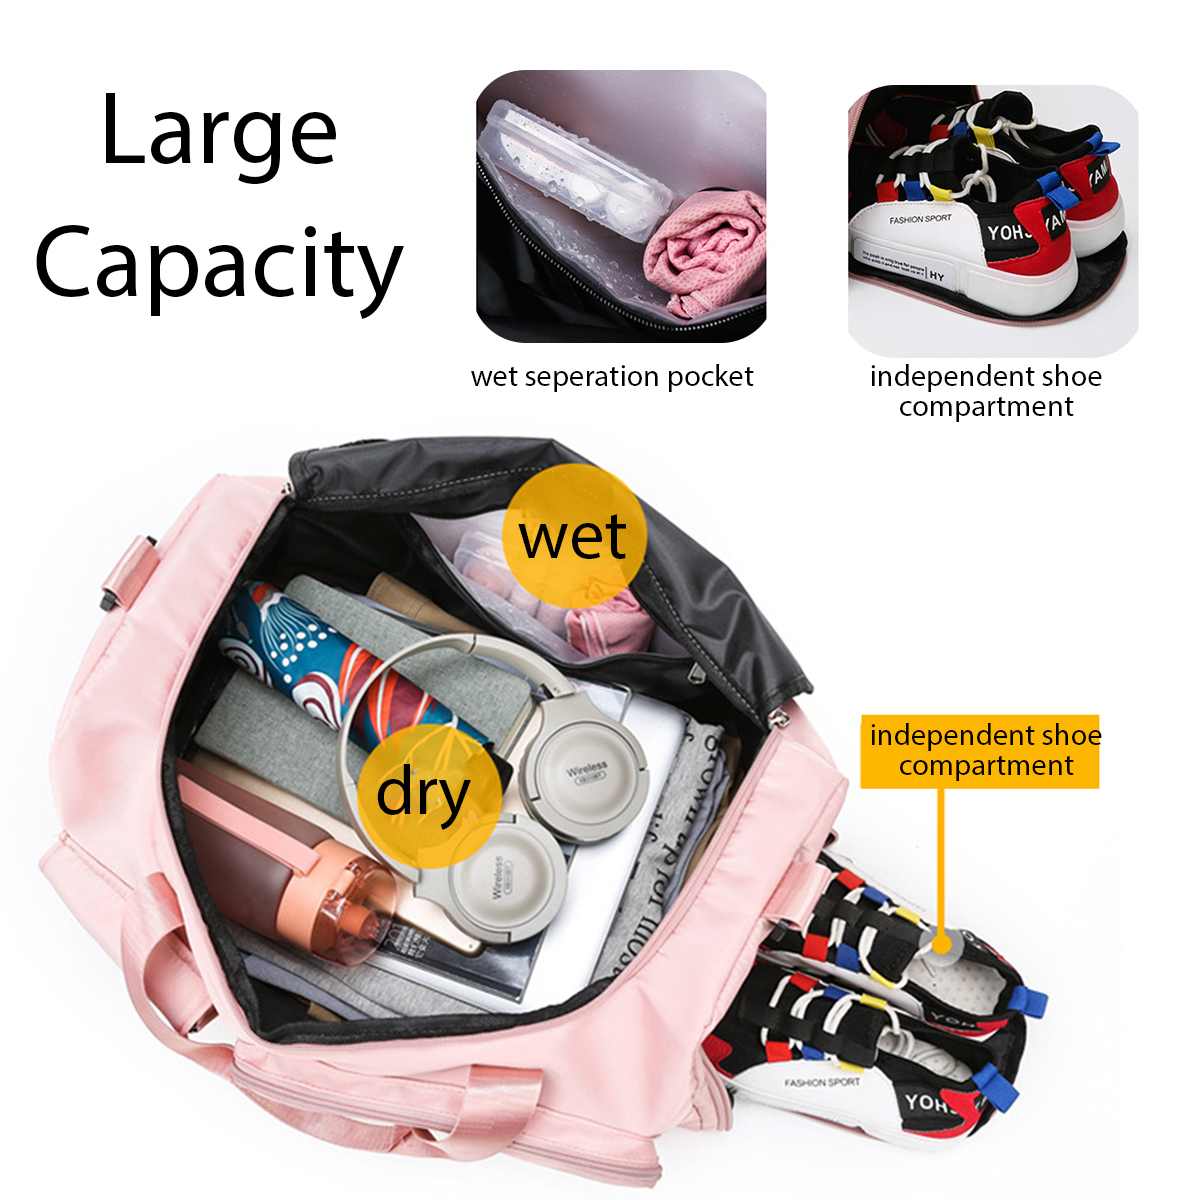 20-Waterproof-Outdoor-Travel-Bag-Large-Capacity-with-Shoes-Compartment-Storage-Bag-Short-Tour-Weeken-1854807-19